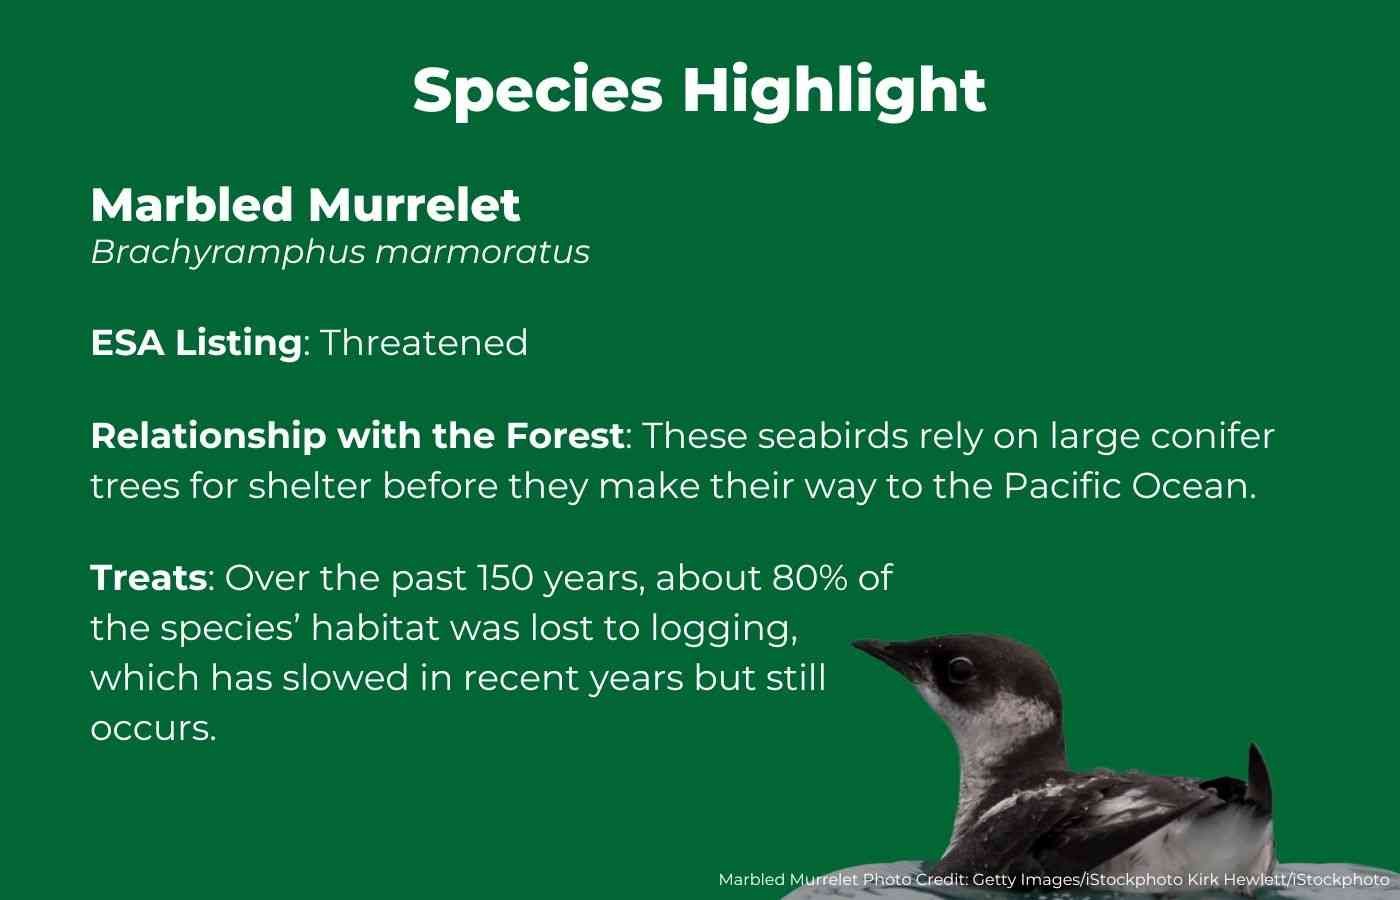 Marbled Murrelet Fact Graphics